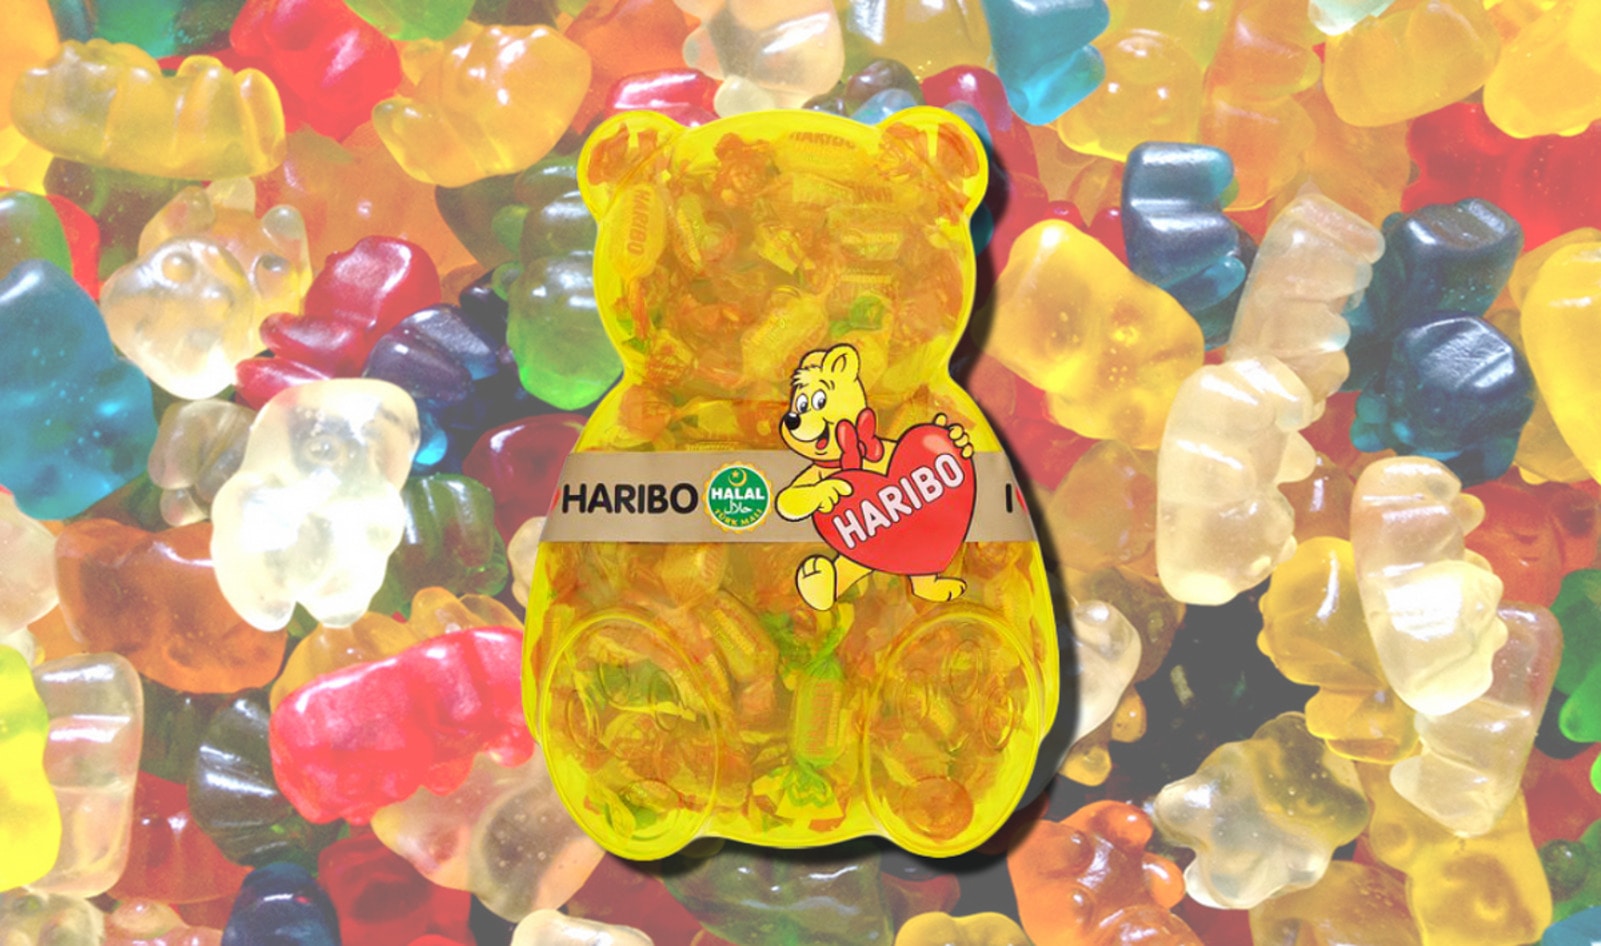 Giant Vegan Haribo Jelly Bear Candy Launches at Tesco